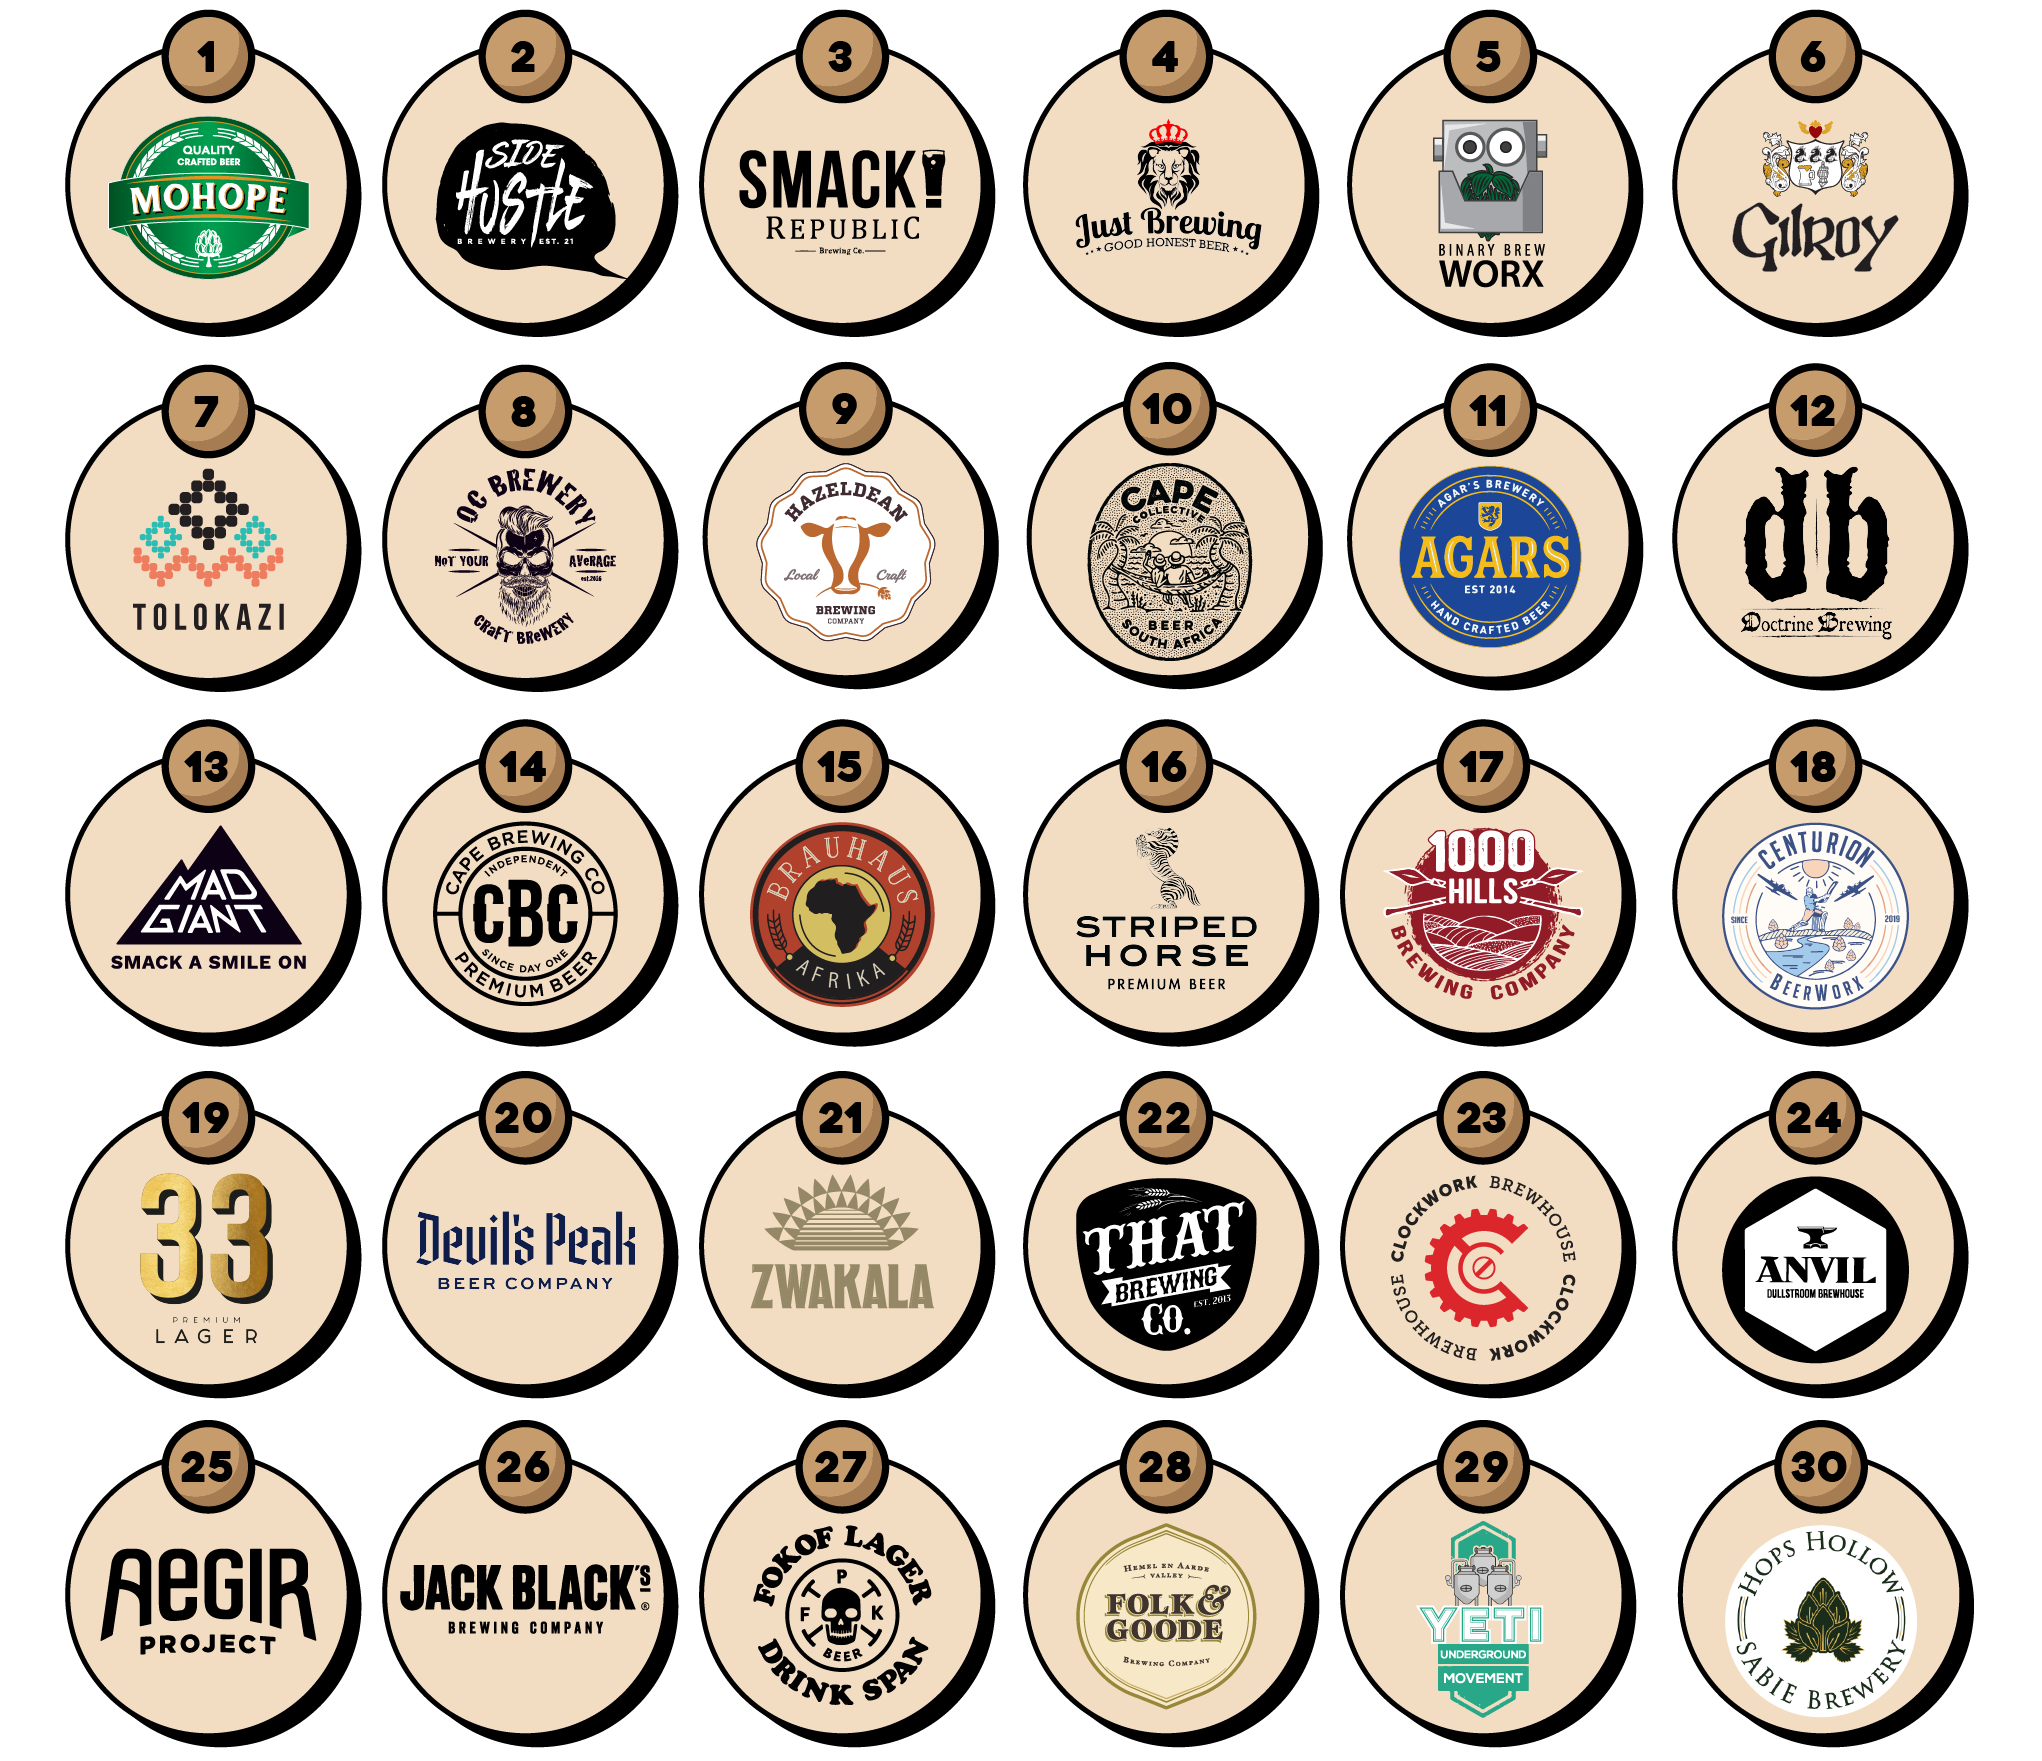 Capital Craft Beer Fest Brewers — Round 5